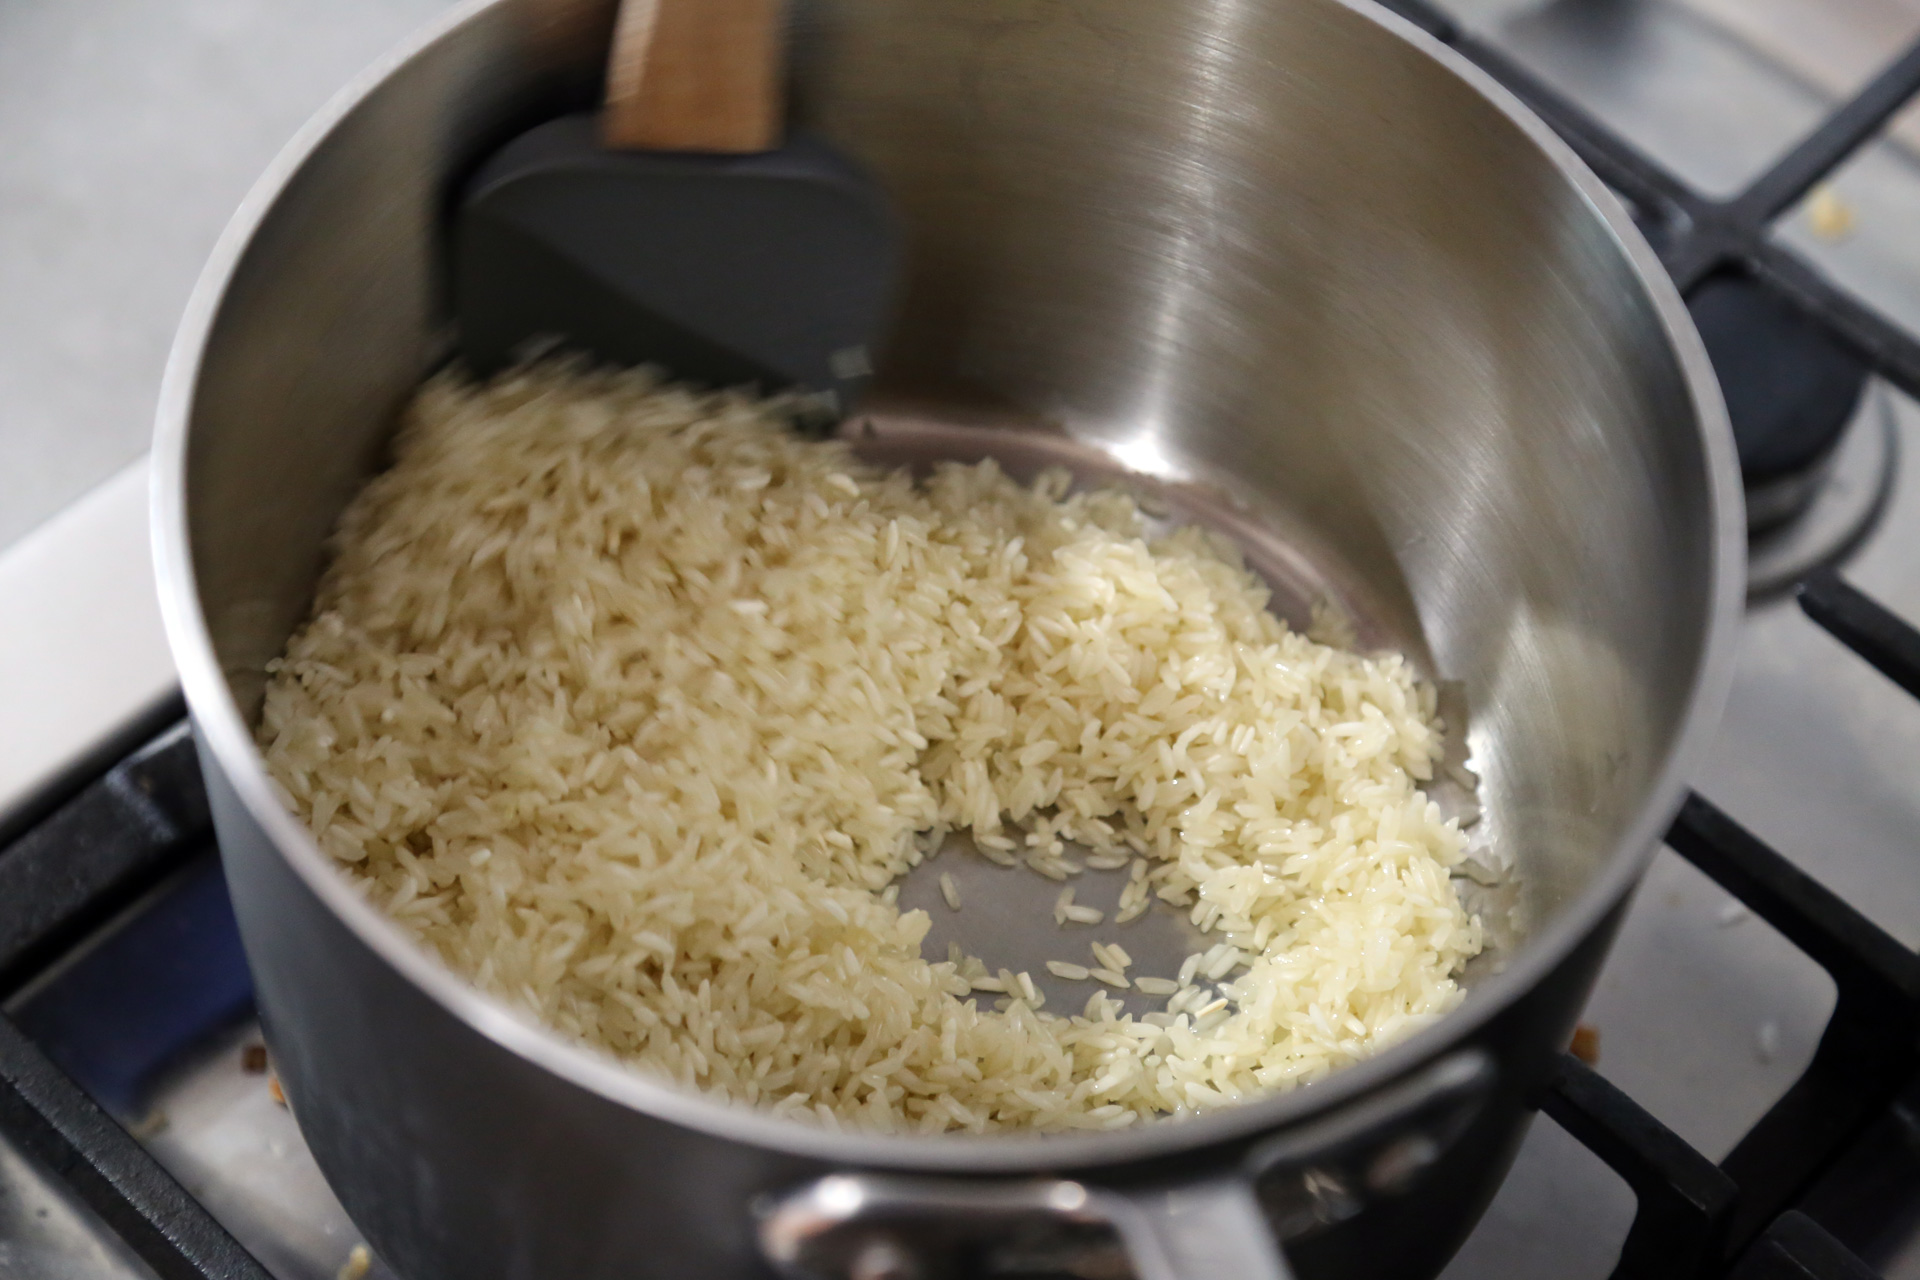 In a large heavy saucepan or Dutch oven, warm the olive oil over medium heat. Add the rice and cook, stirring often, until the rice becomes golden, about 5 minutes.